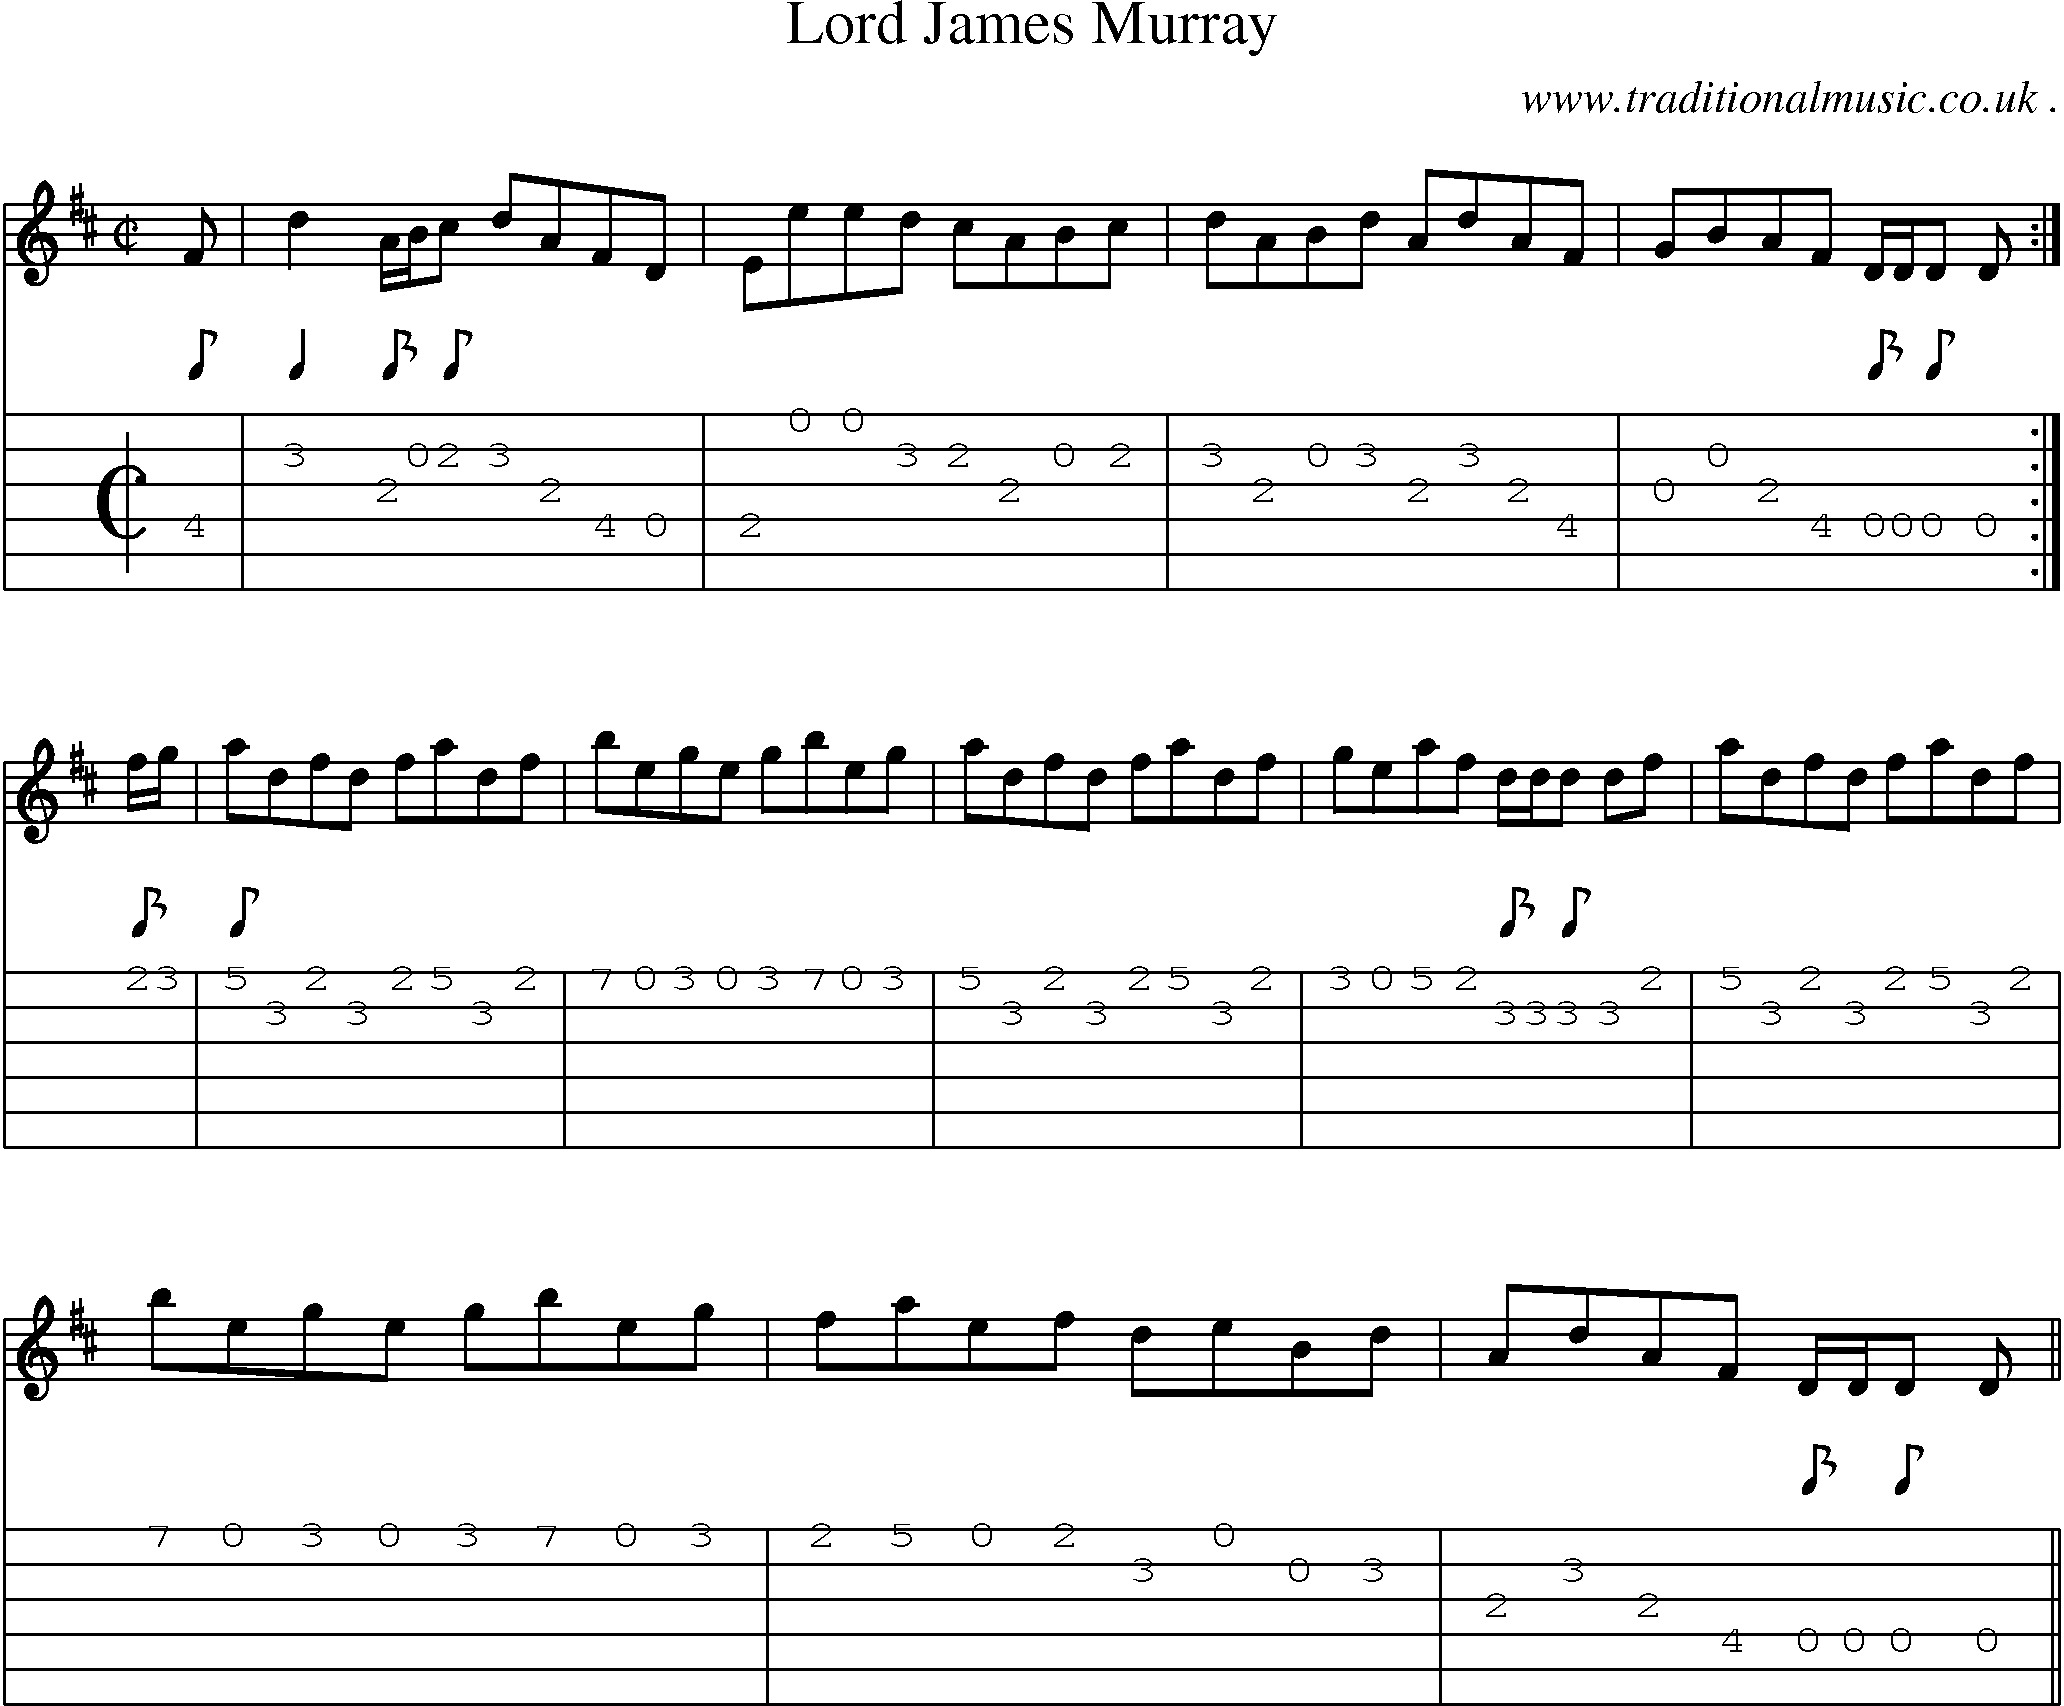 Sheet-music  score, Chords and Guitar Tabs for Lord James Murray 